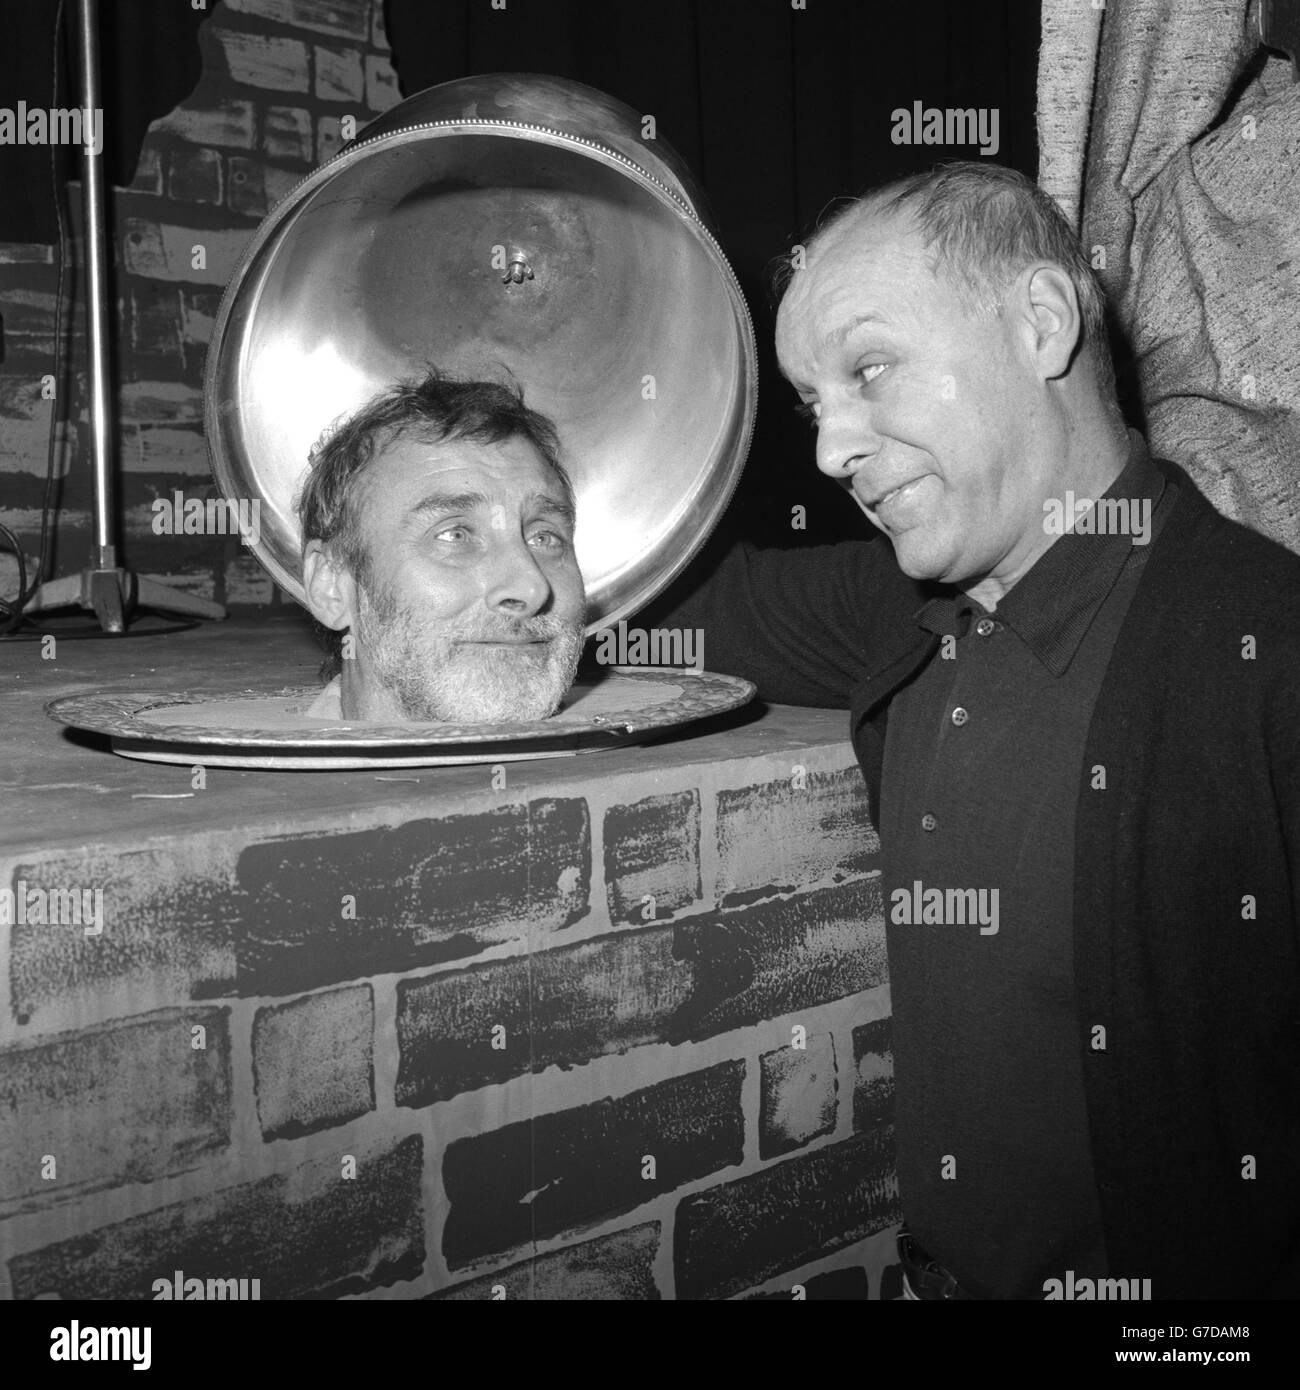 Actor Bill Kerr (r) lifts the lid on a serving dish only to find comedy actor Spike Milligan.. Actor Bill Kerr (r) lifts the lid on a serving dish only to find comedy actor Spike Milligan. Stock Photo